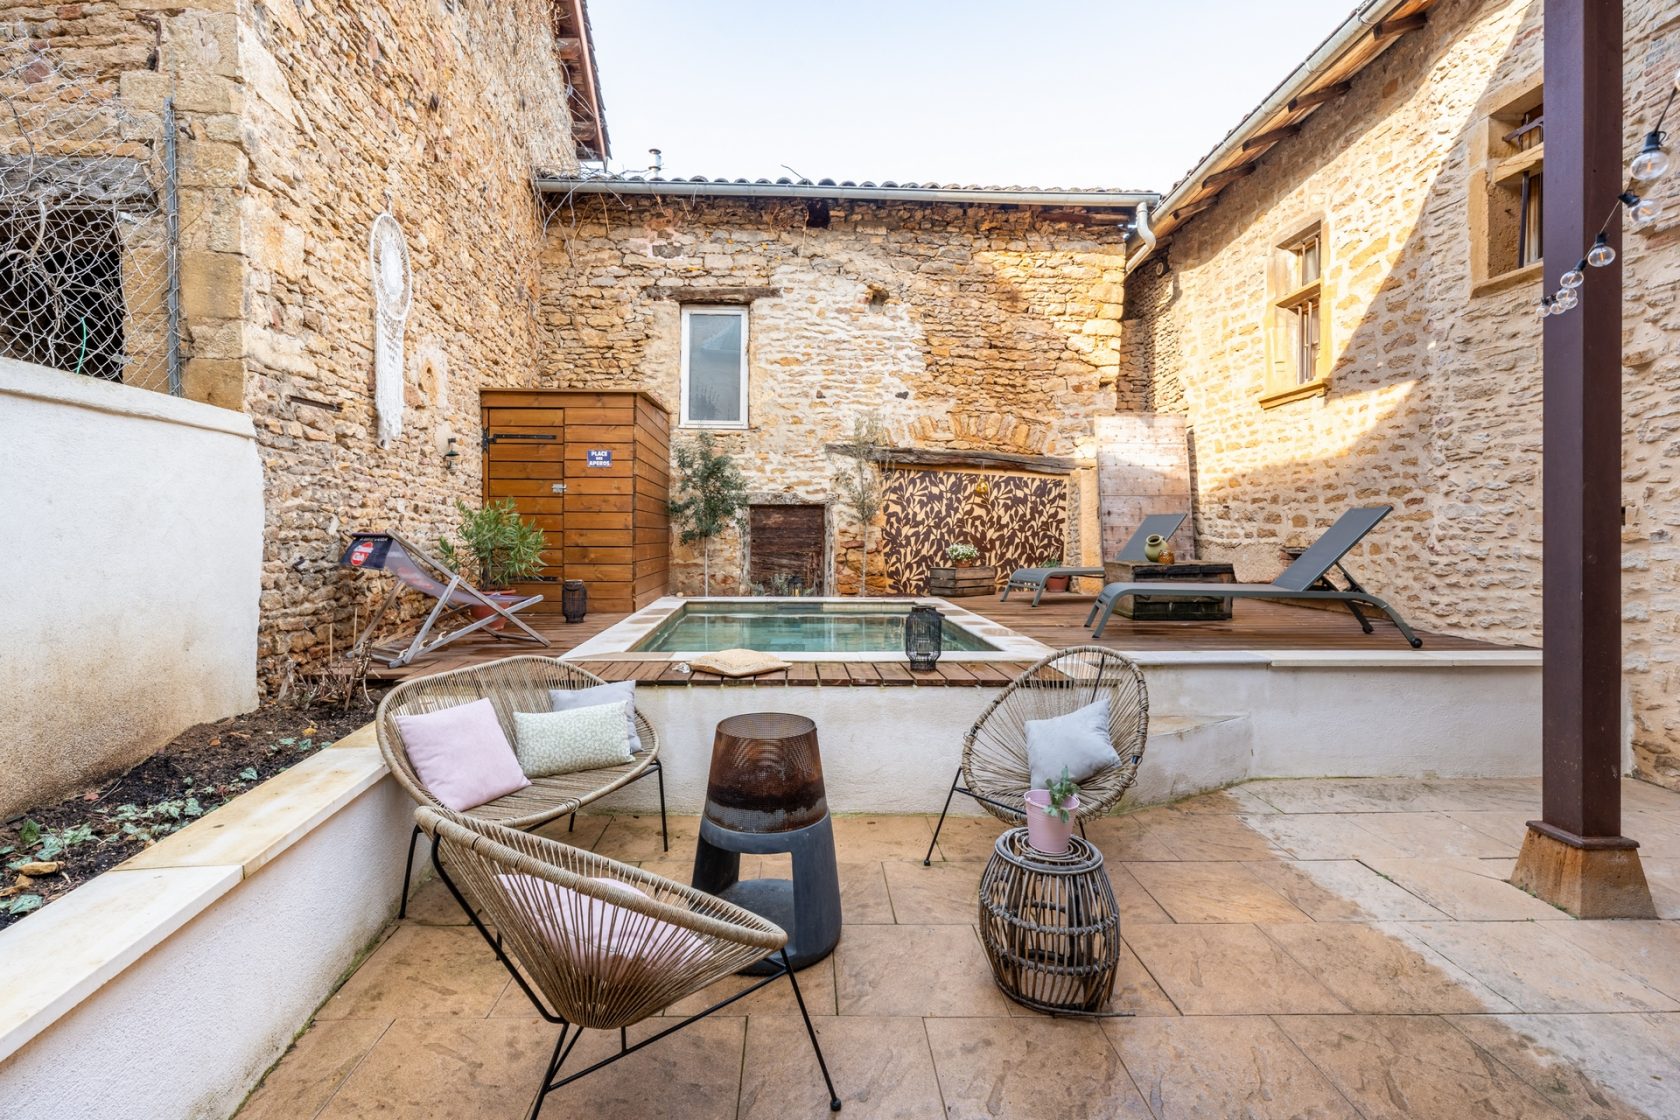 Unusual village house with interior courtyard and swimming pool